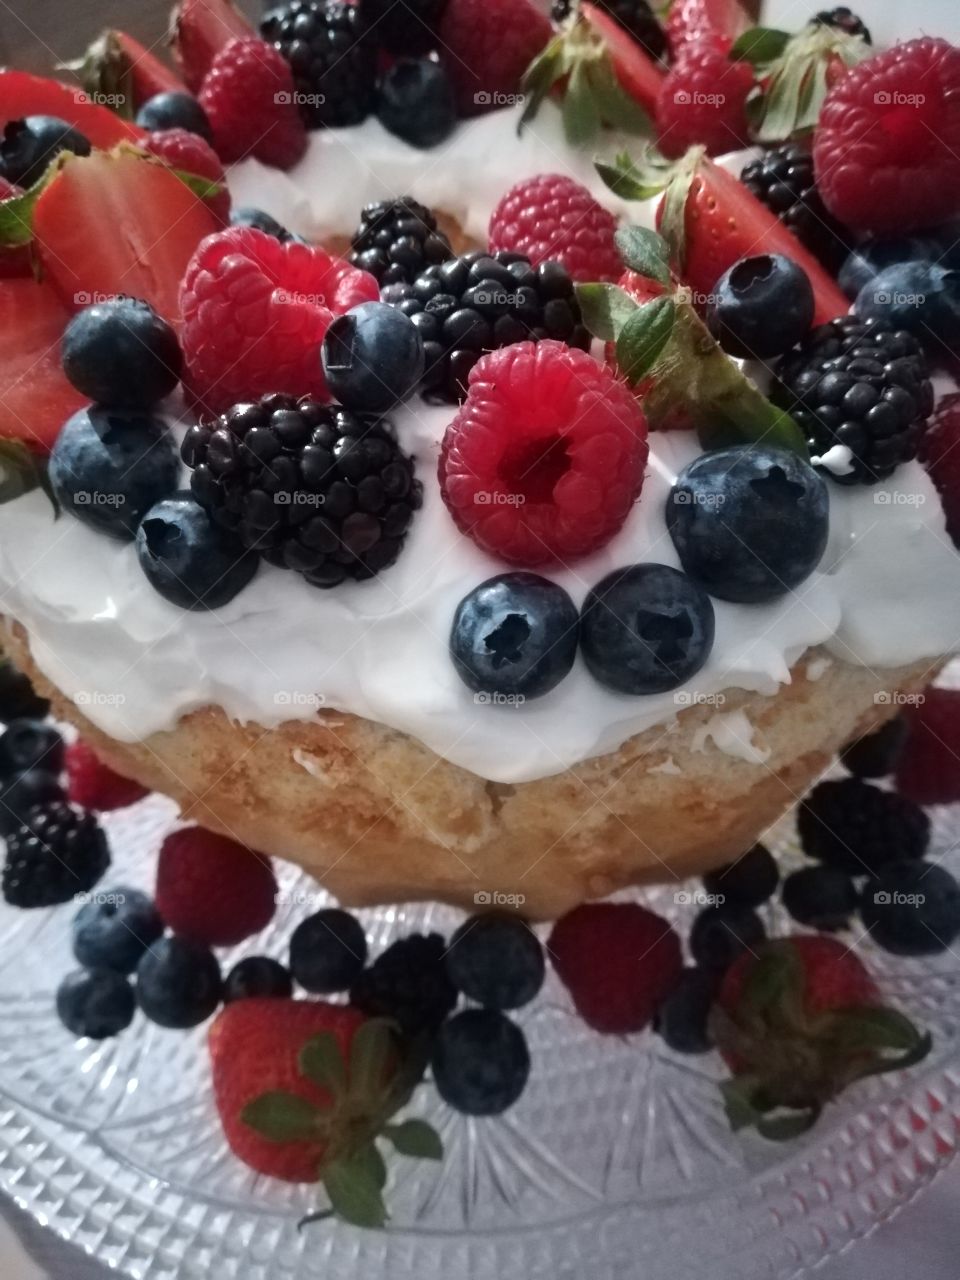 Angel food cake is a great dessert